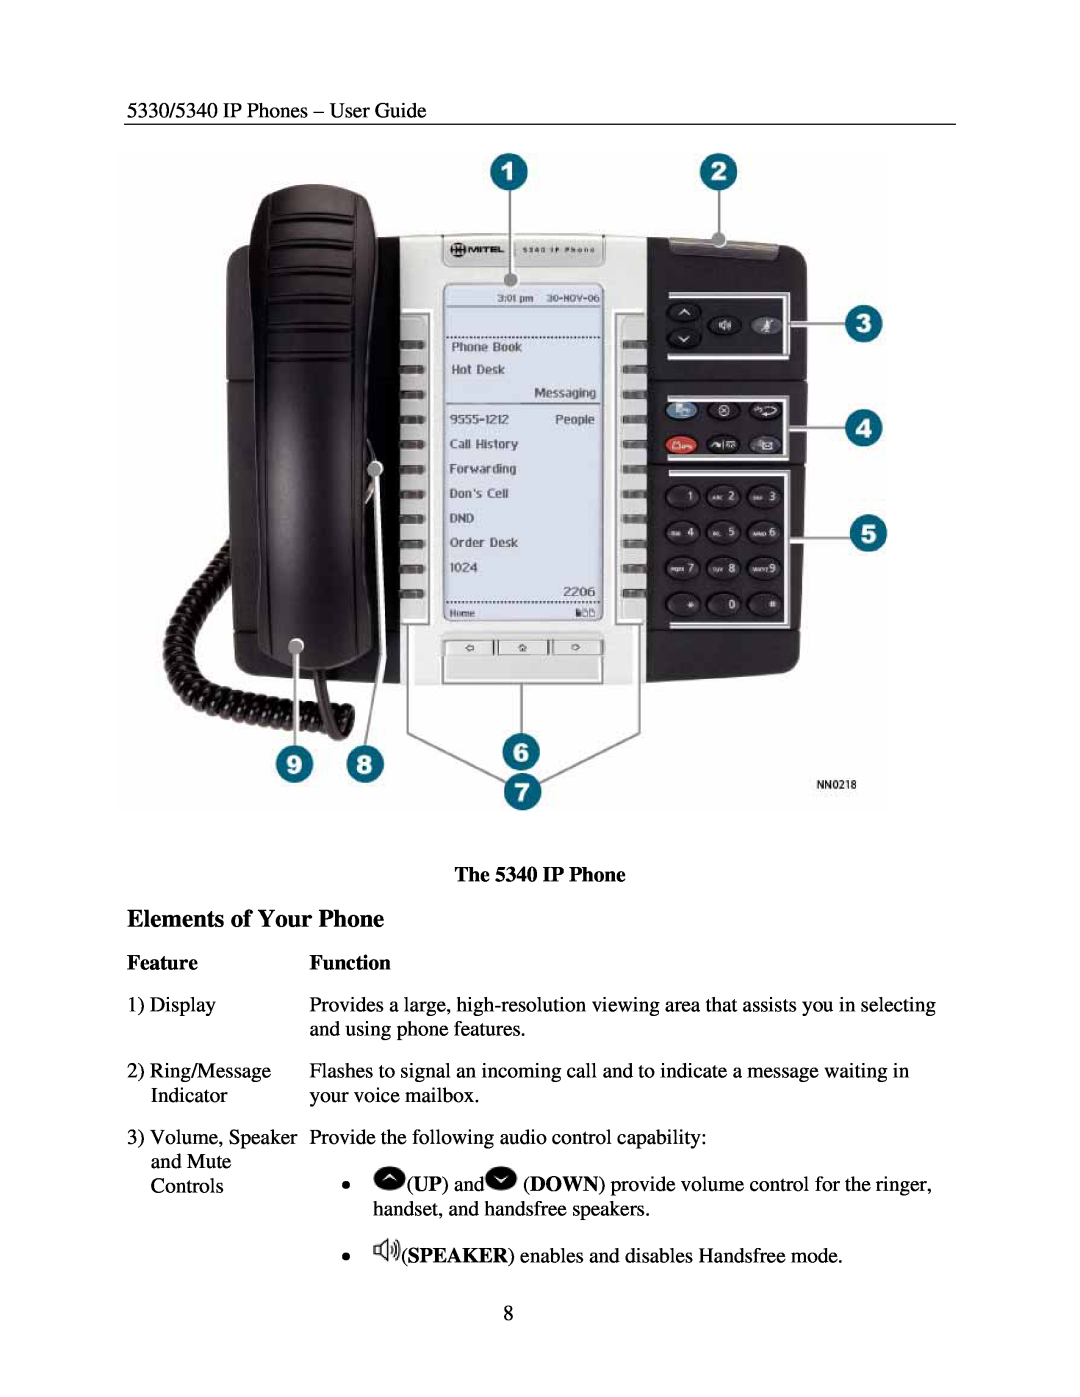 Mitel 5330 manual Elements of Your Phone, The 5340 IP Phone, Feature, Function 